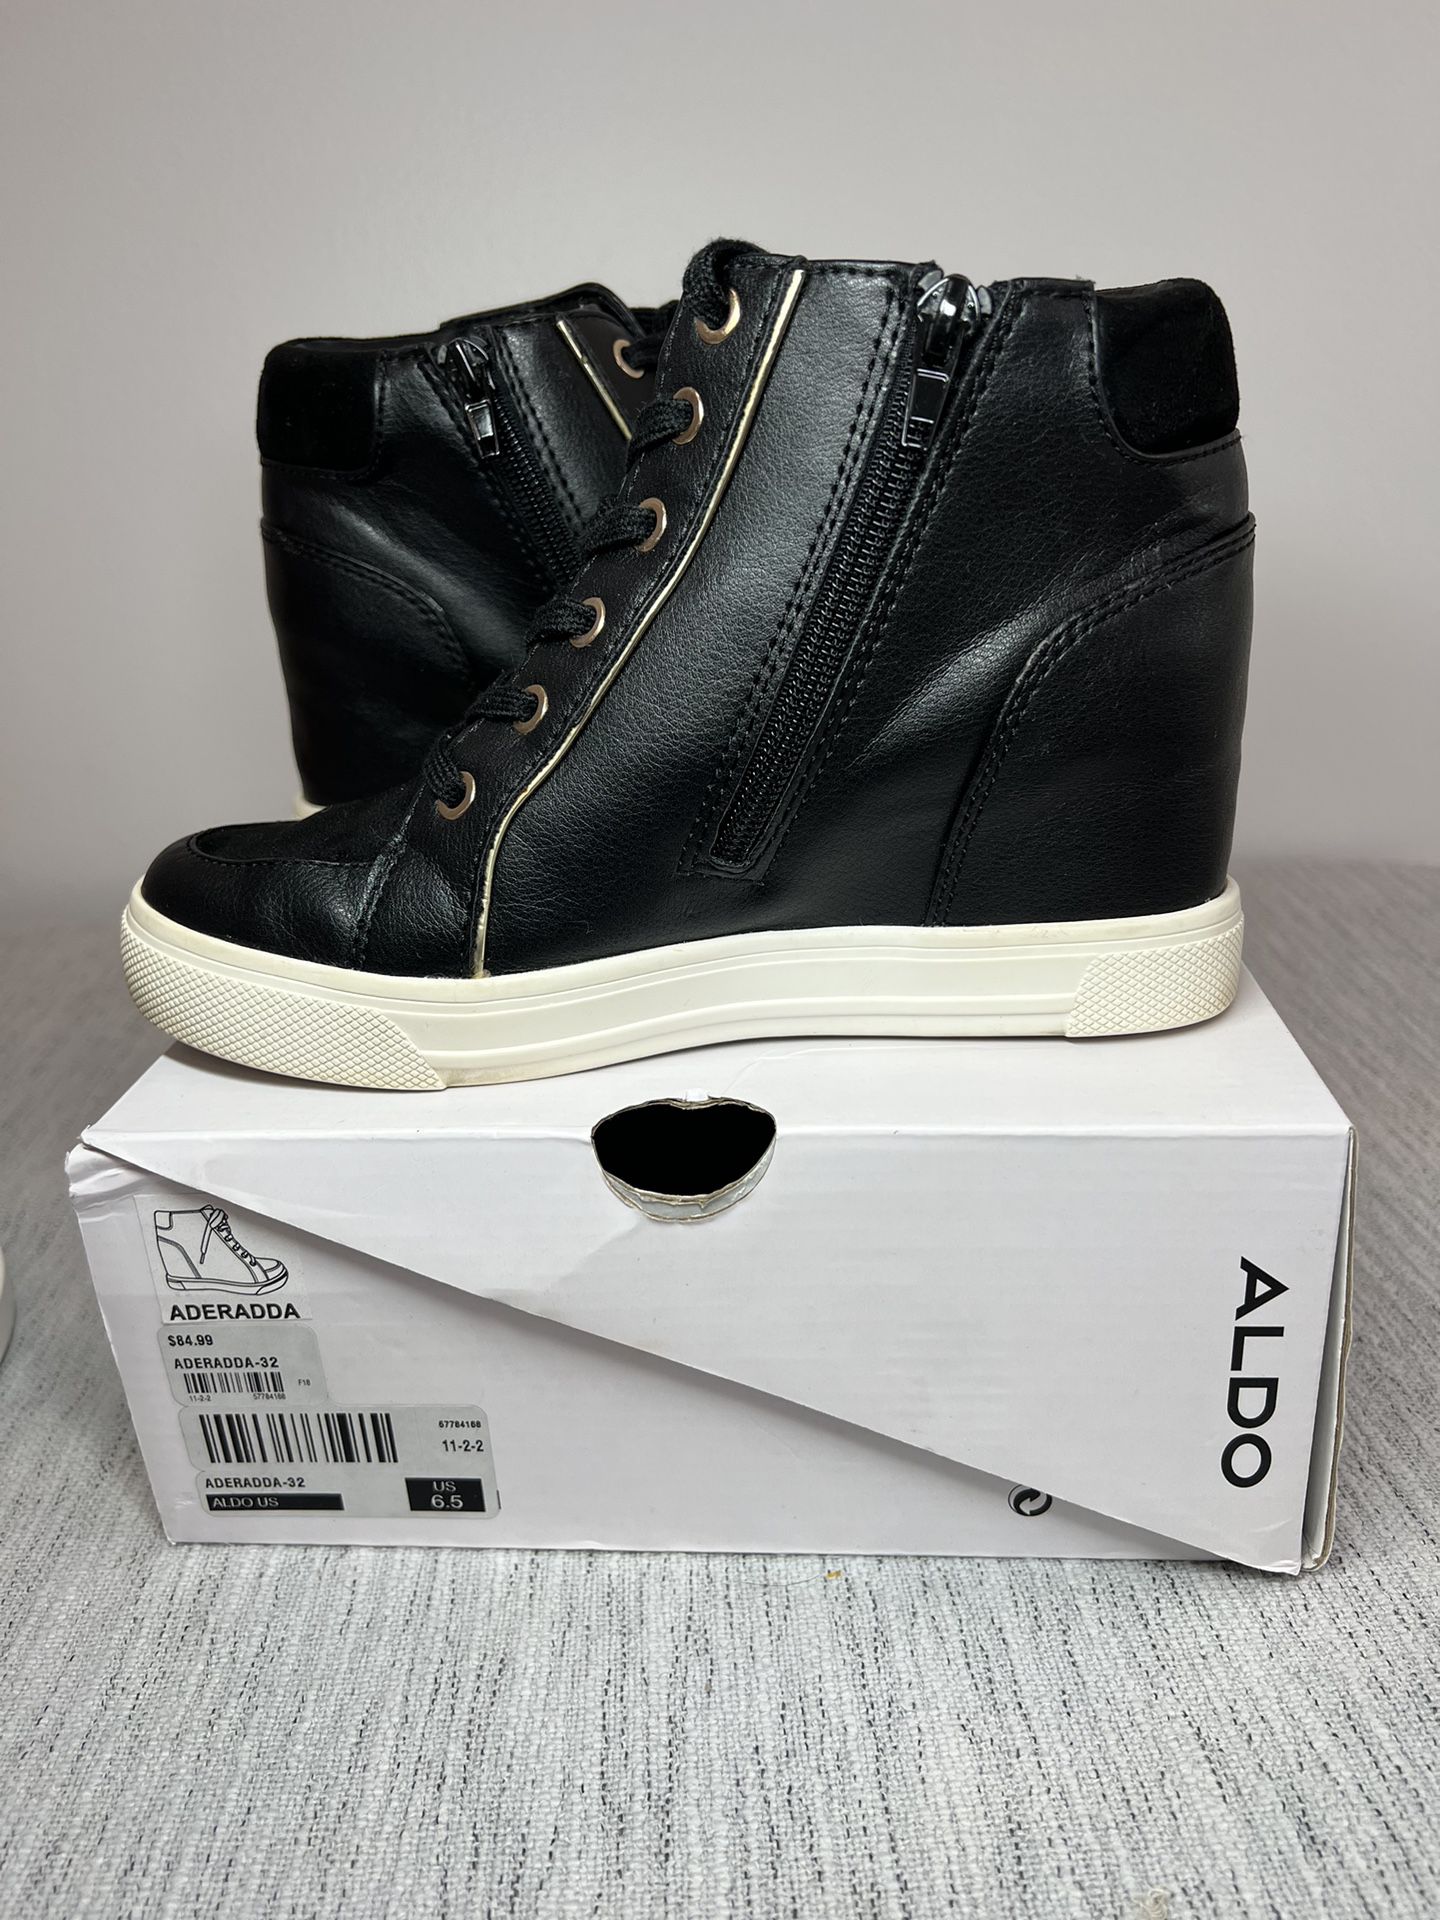 NEW Aldo Aderadda High Heal Sneakers All Leather Minimum Use Size 6.5